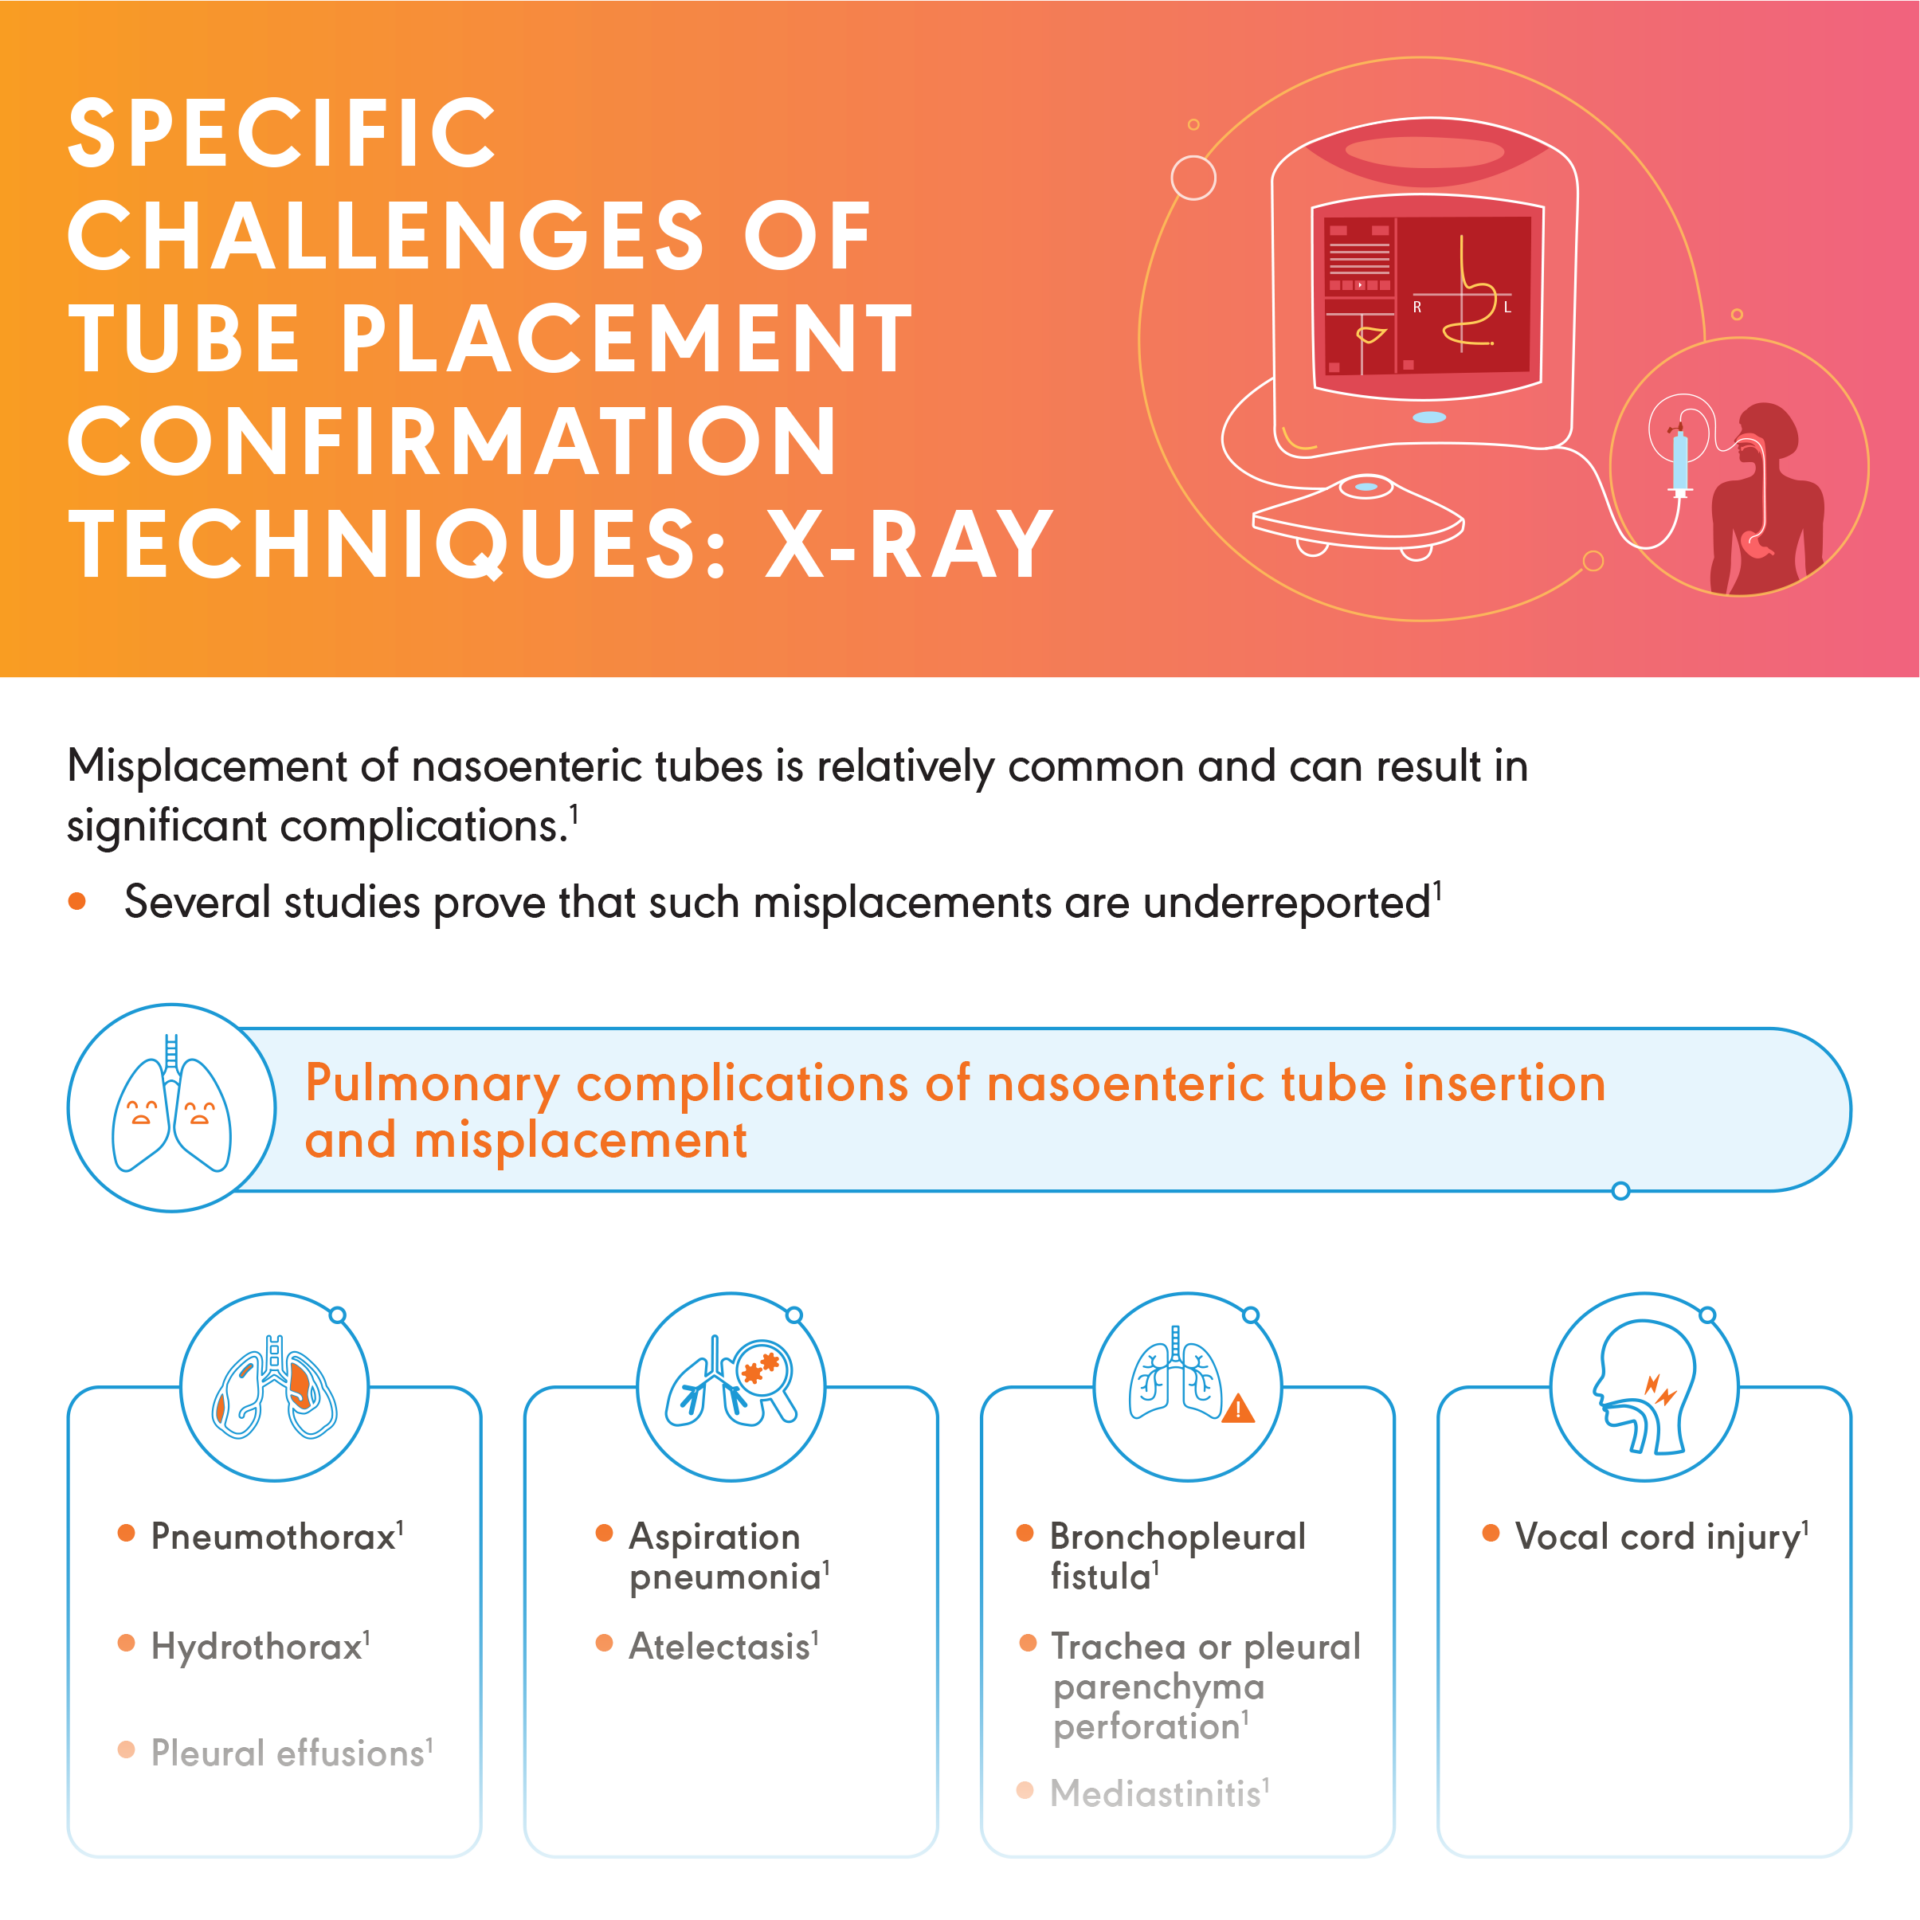 Specific Challenges of Tube Placement Confirmation with X-Ray